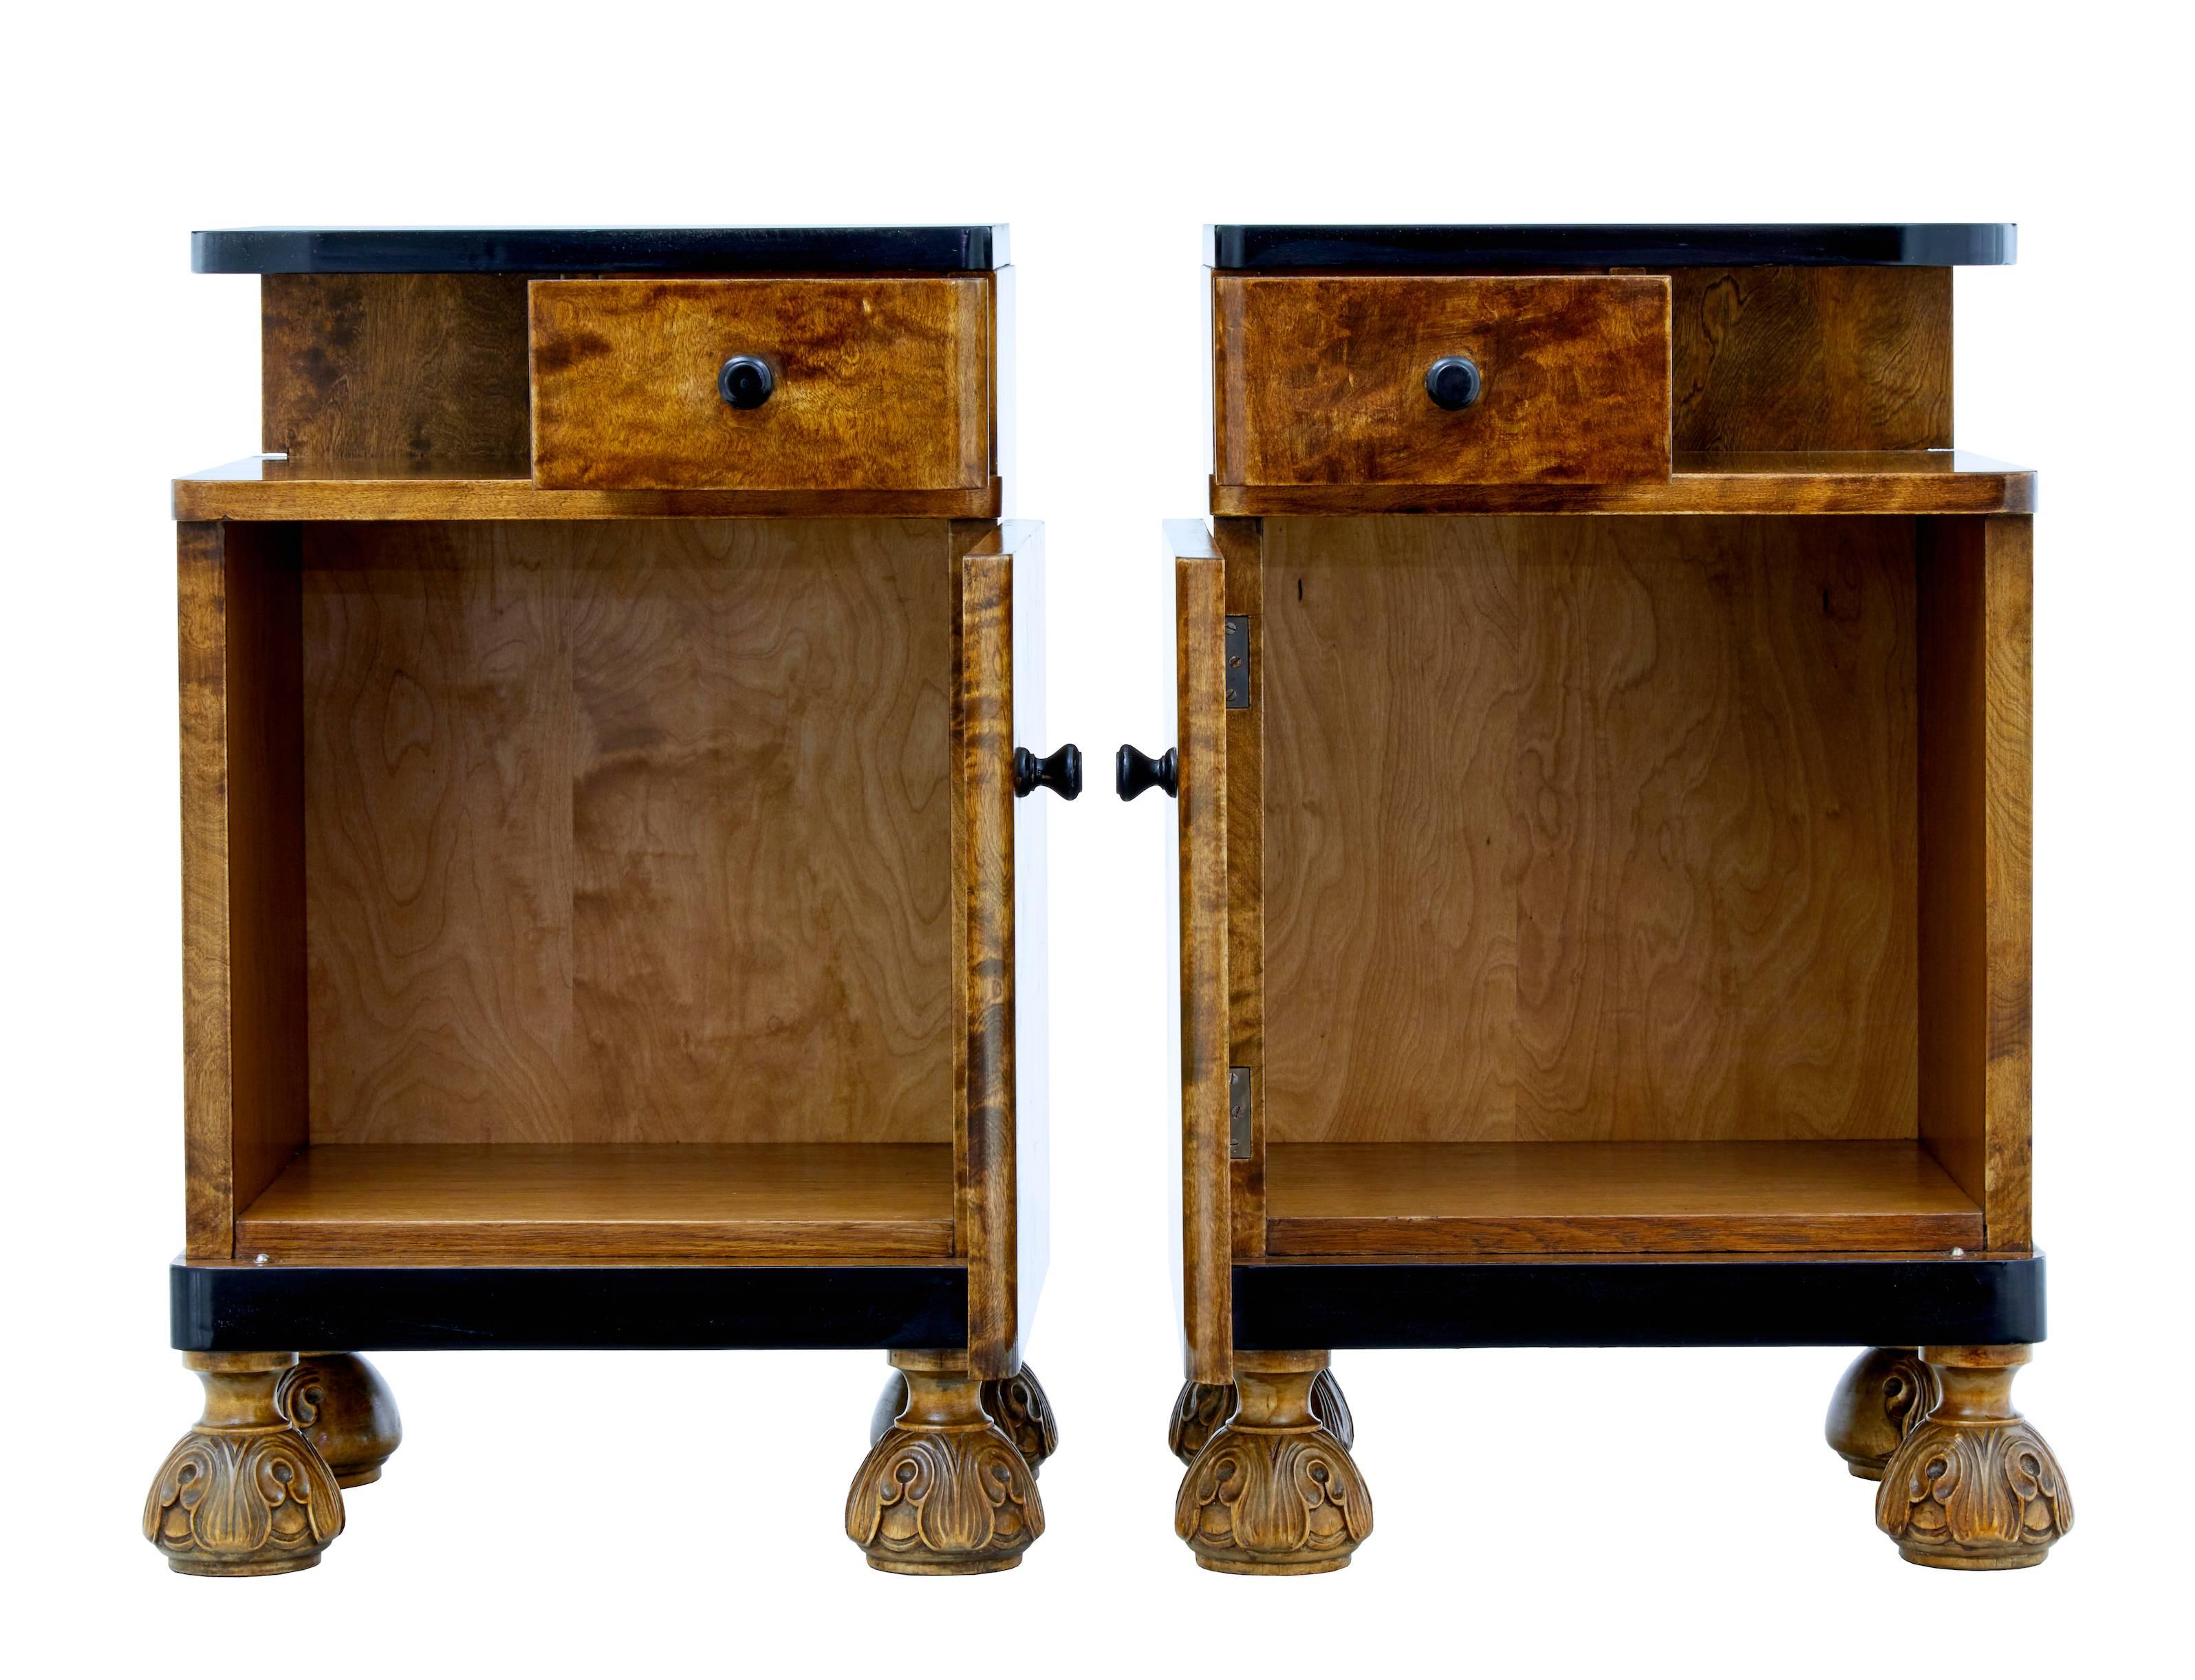 Fine pair of Art Deco period bedside tables, circa 1930.
Both with single door cupboards and a single drawer with ebonized handles.
Later ebonized floating top surface, and edging below the cupboard door.
Standing on carved feet.

We can get